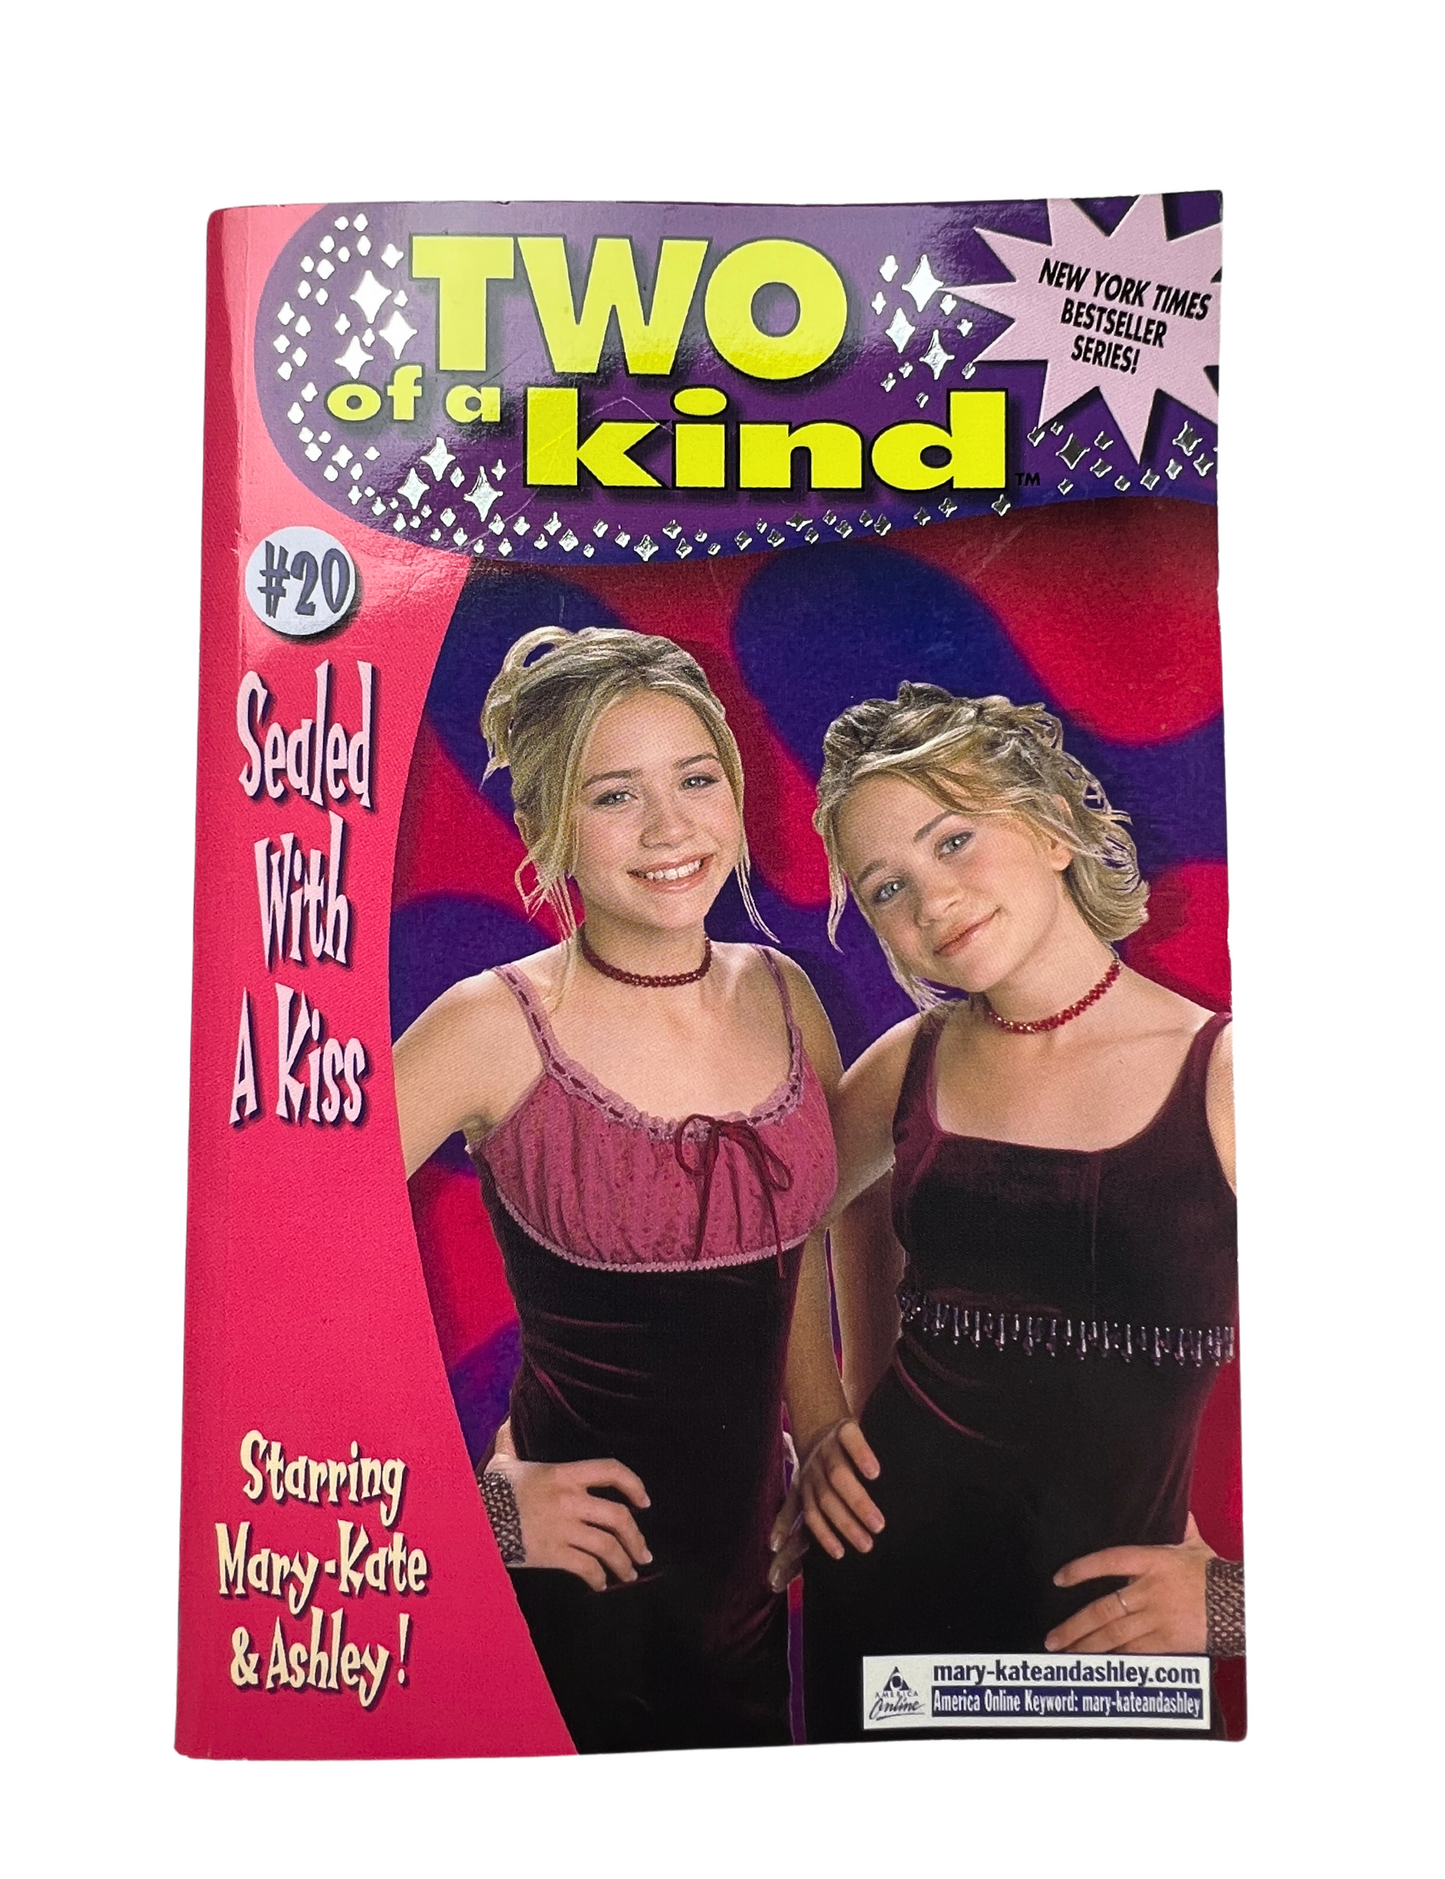 00’s Two of a Kind Mary Kate & Ashley Olsen Y2K Paperback Books